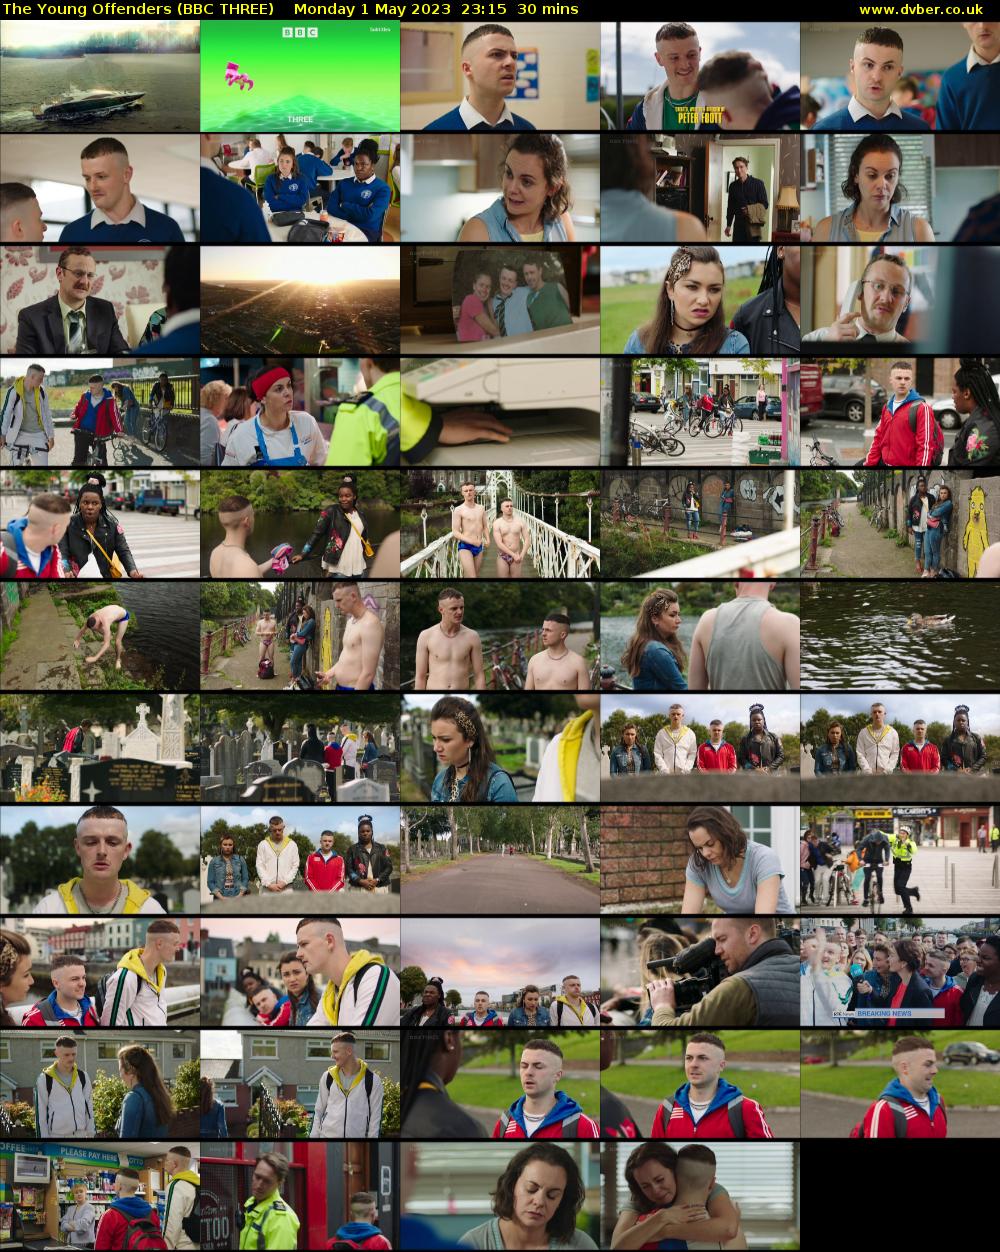 The Young Offenders (BBC THREE) Monday 1 May 2023 23:15 - 23:45